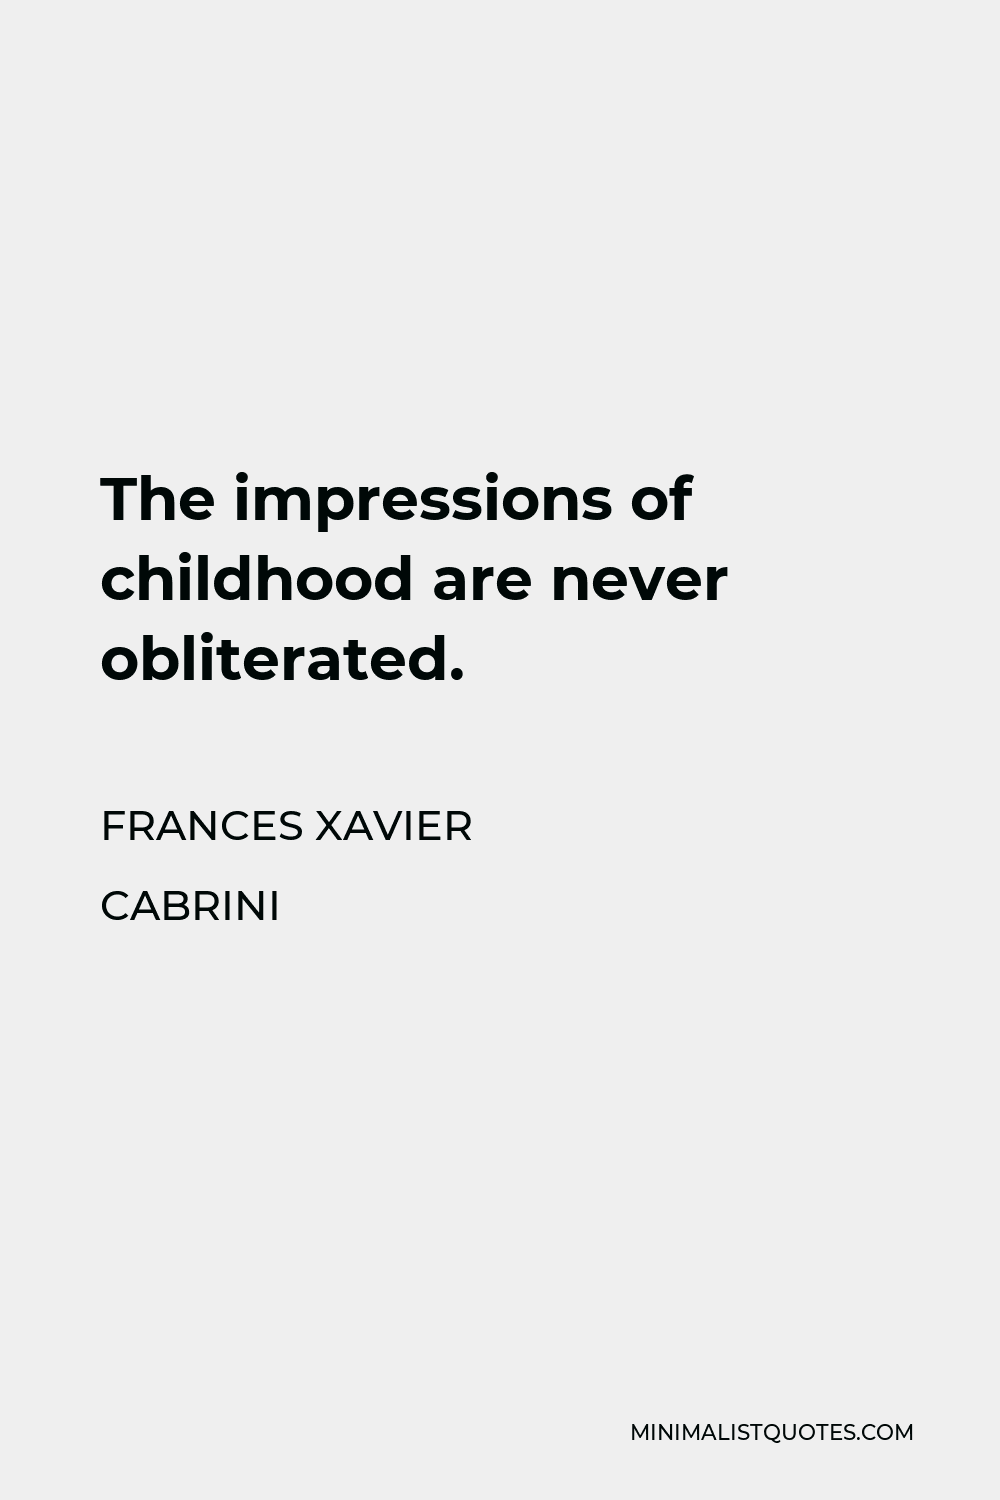 Frances Xavier Cabrini Quote - The impressions of childhood are never obliterated.